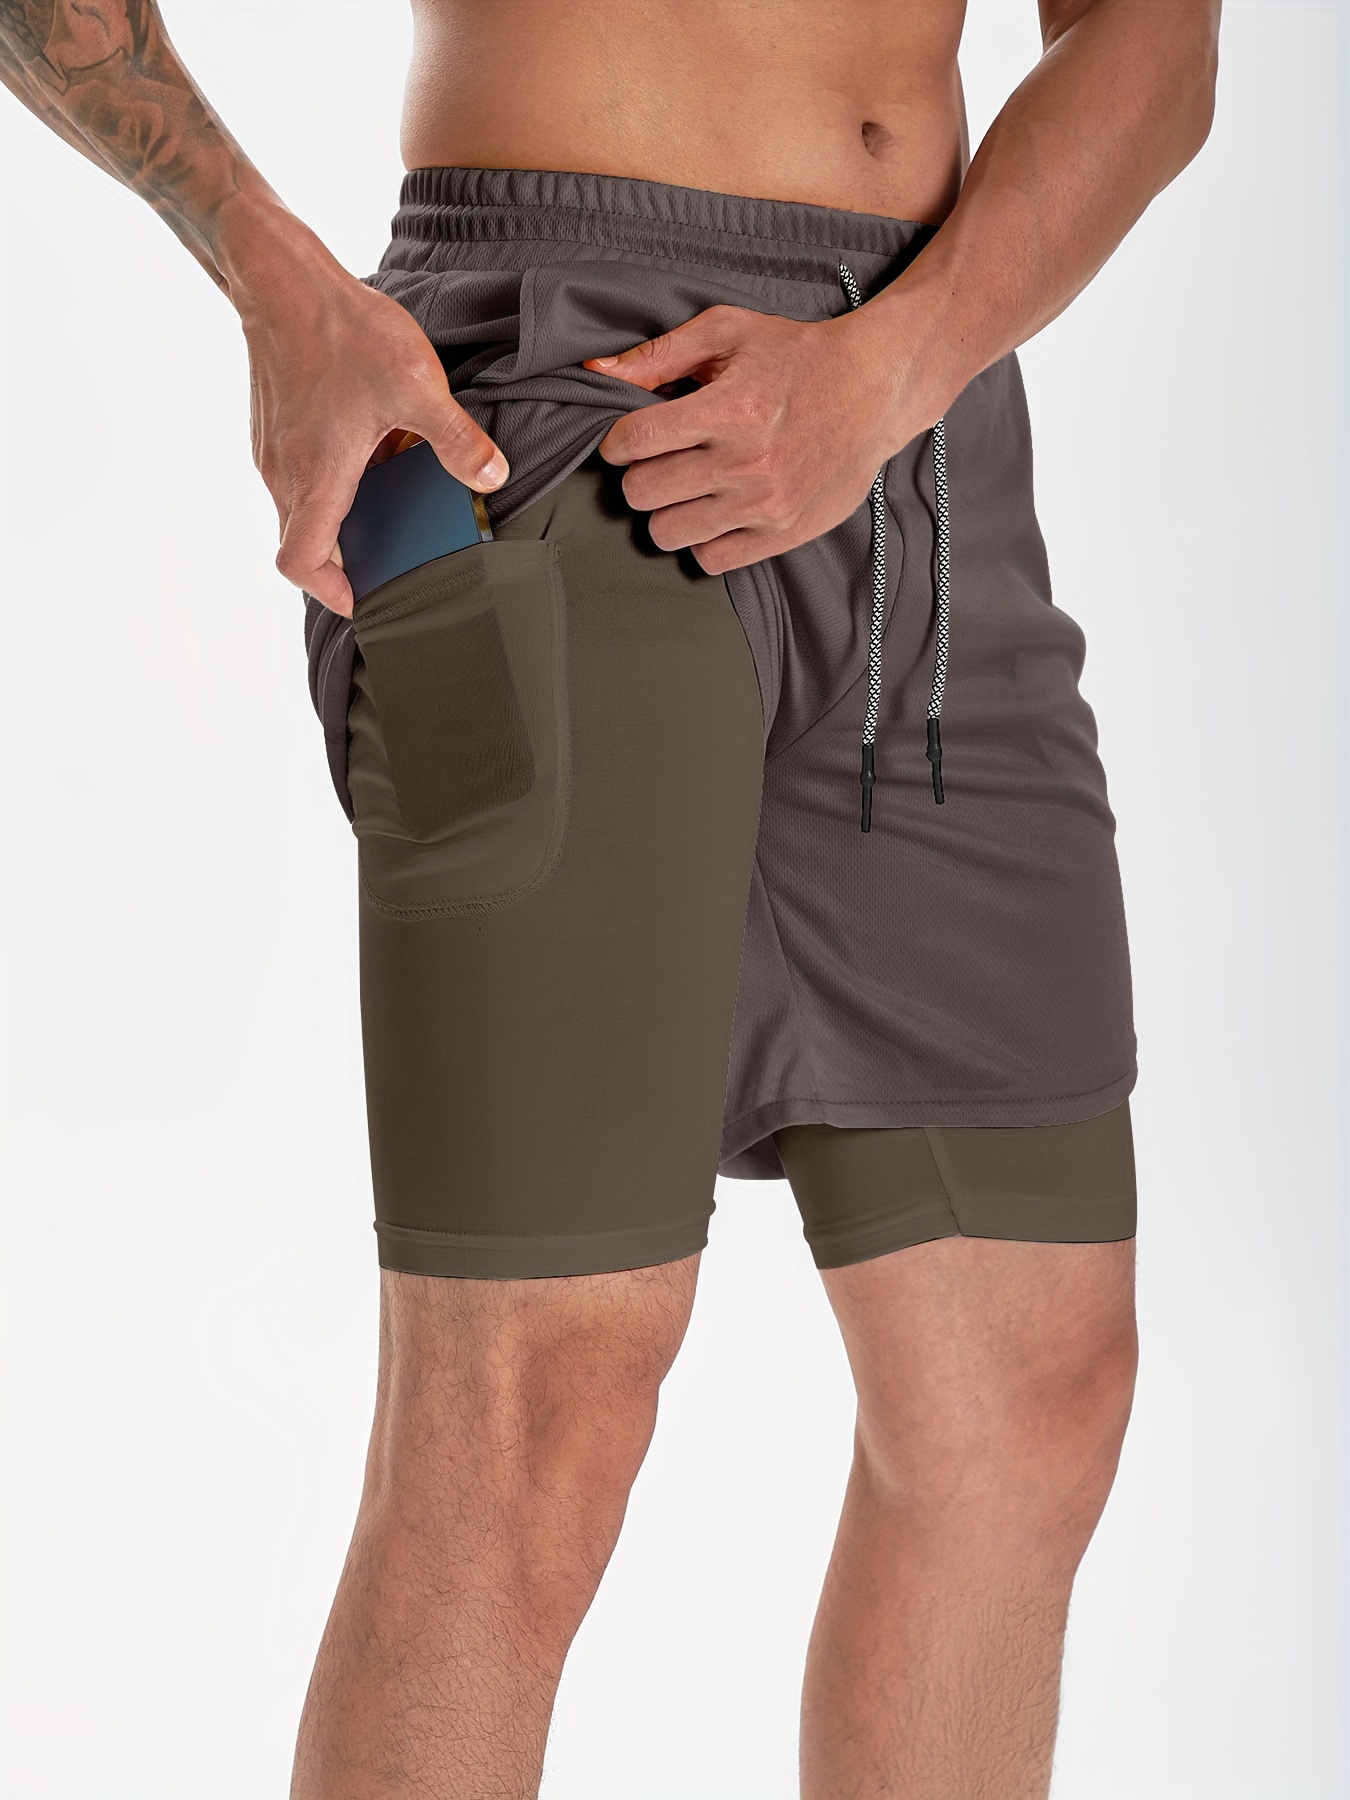 2in1 Running Mens Sports Shorts Built-in Phone Pocket Liner Workout Short  New